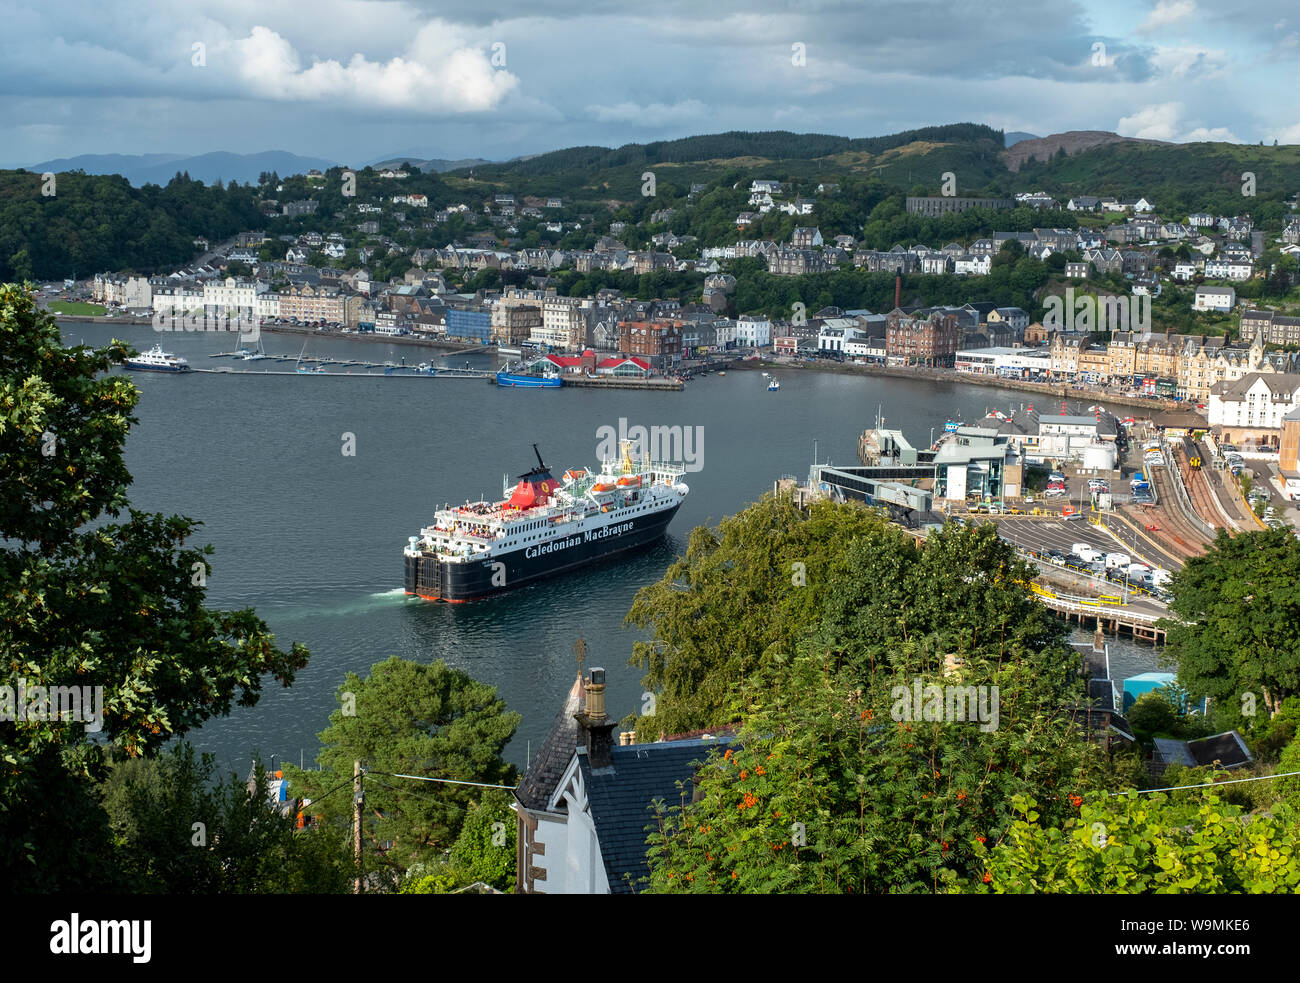 The Caledonian MacBrayne ferry the Isle of Mull arrives into Oban Harbour on its return journey from Craignure, on the Island of Mull, Scotland. Stock Photo